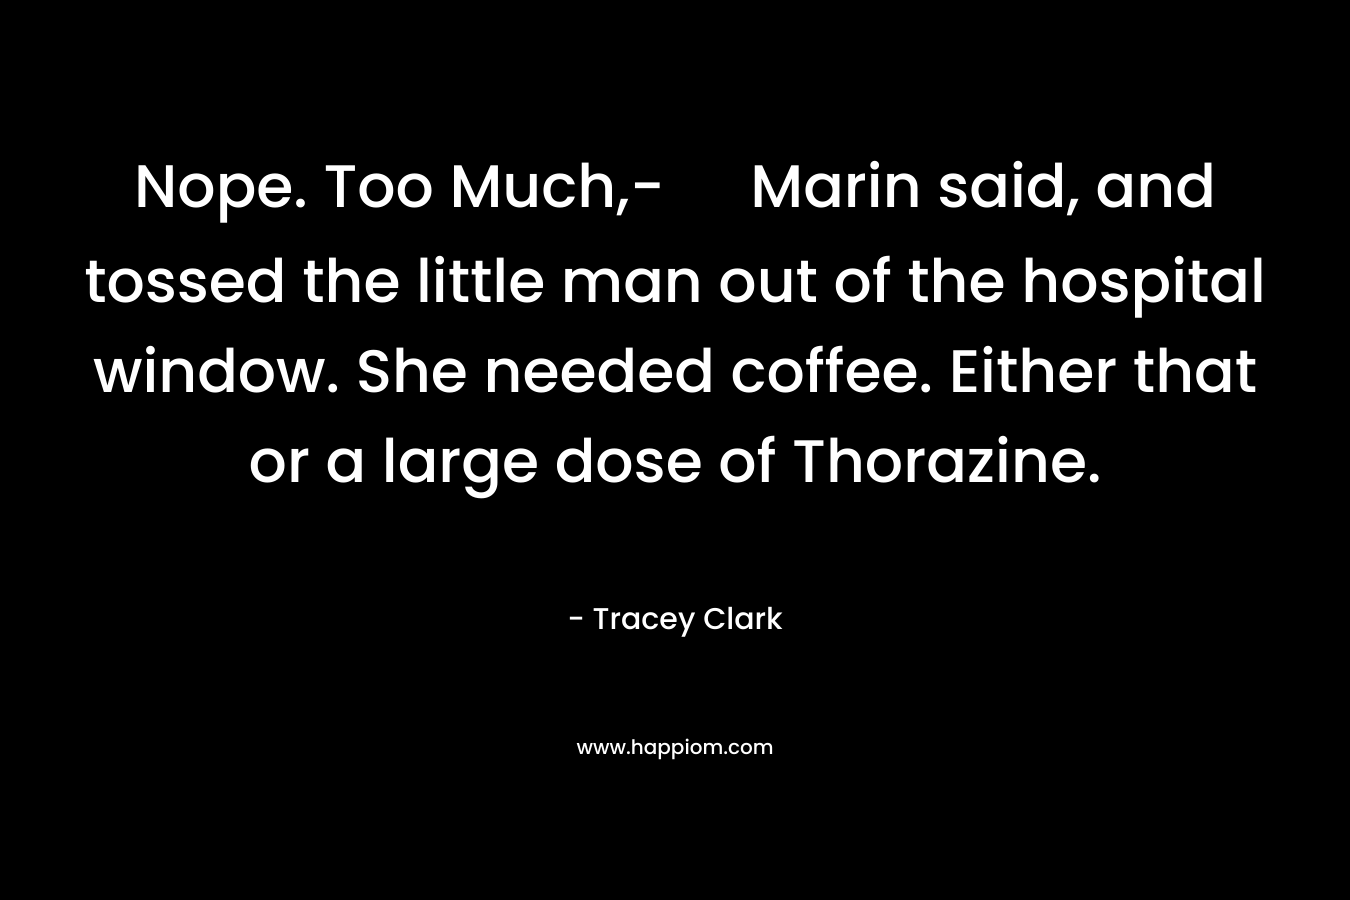 Nope. Too Much,- Marin said, and tossed the little man out of the hospital window. She needed coffee. Either that or a large dose of Thorazine.